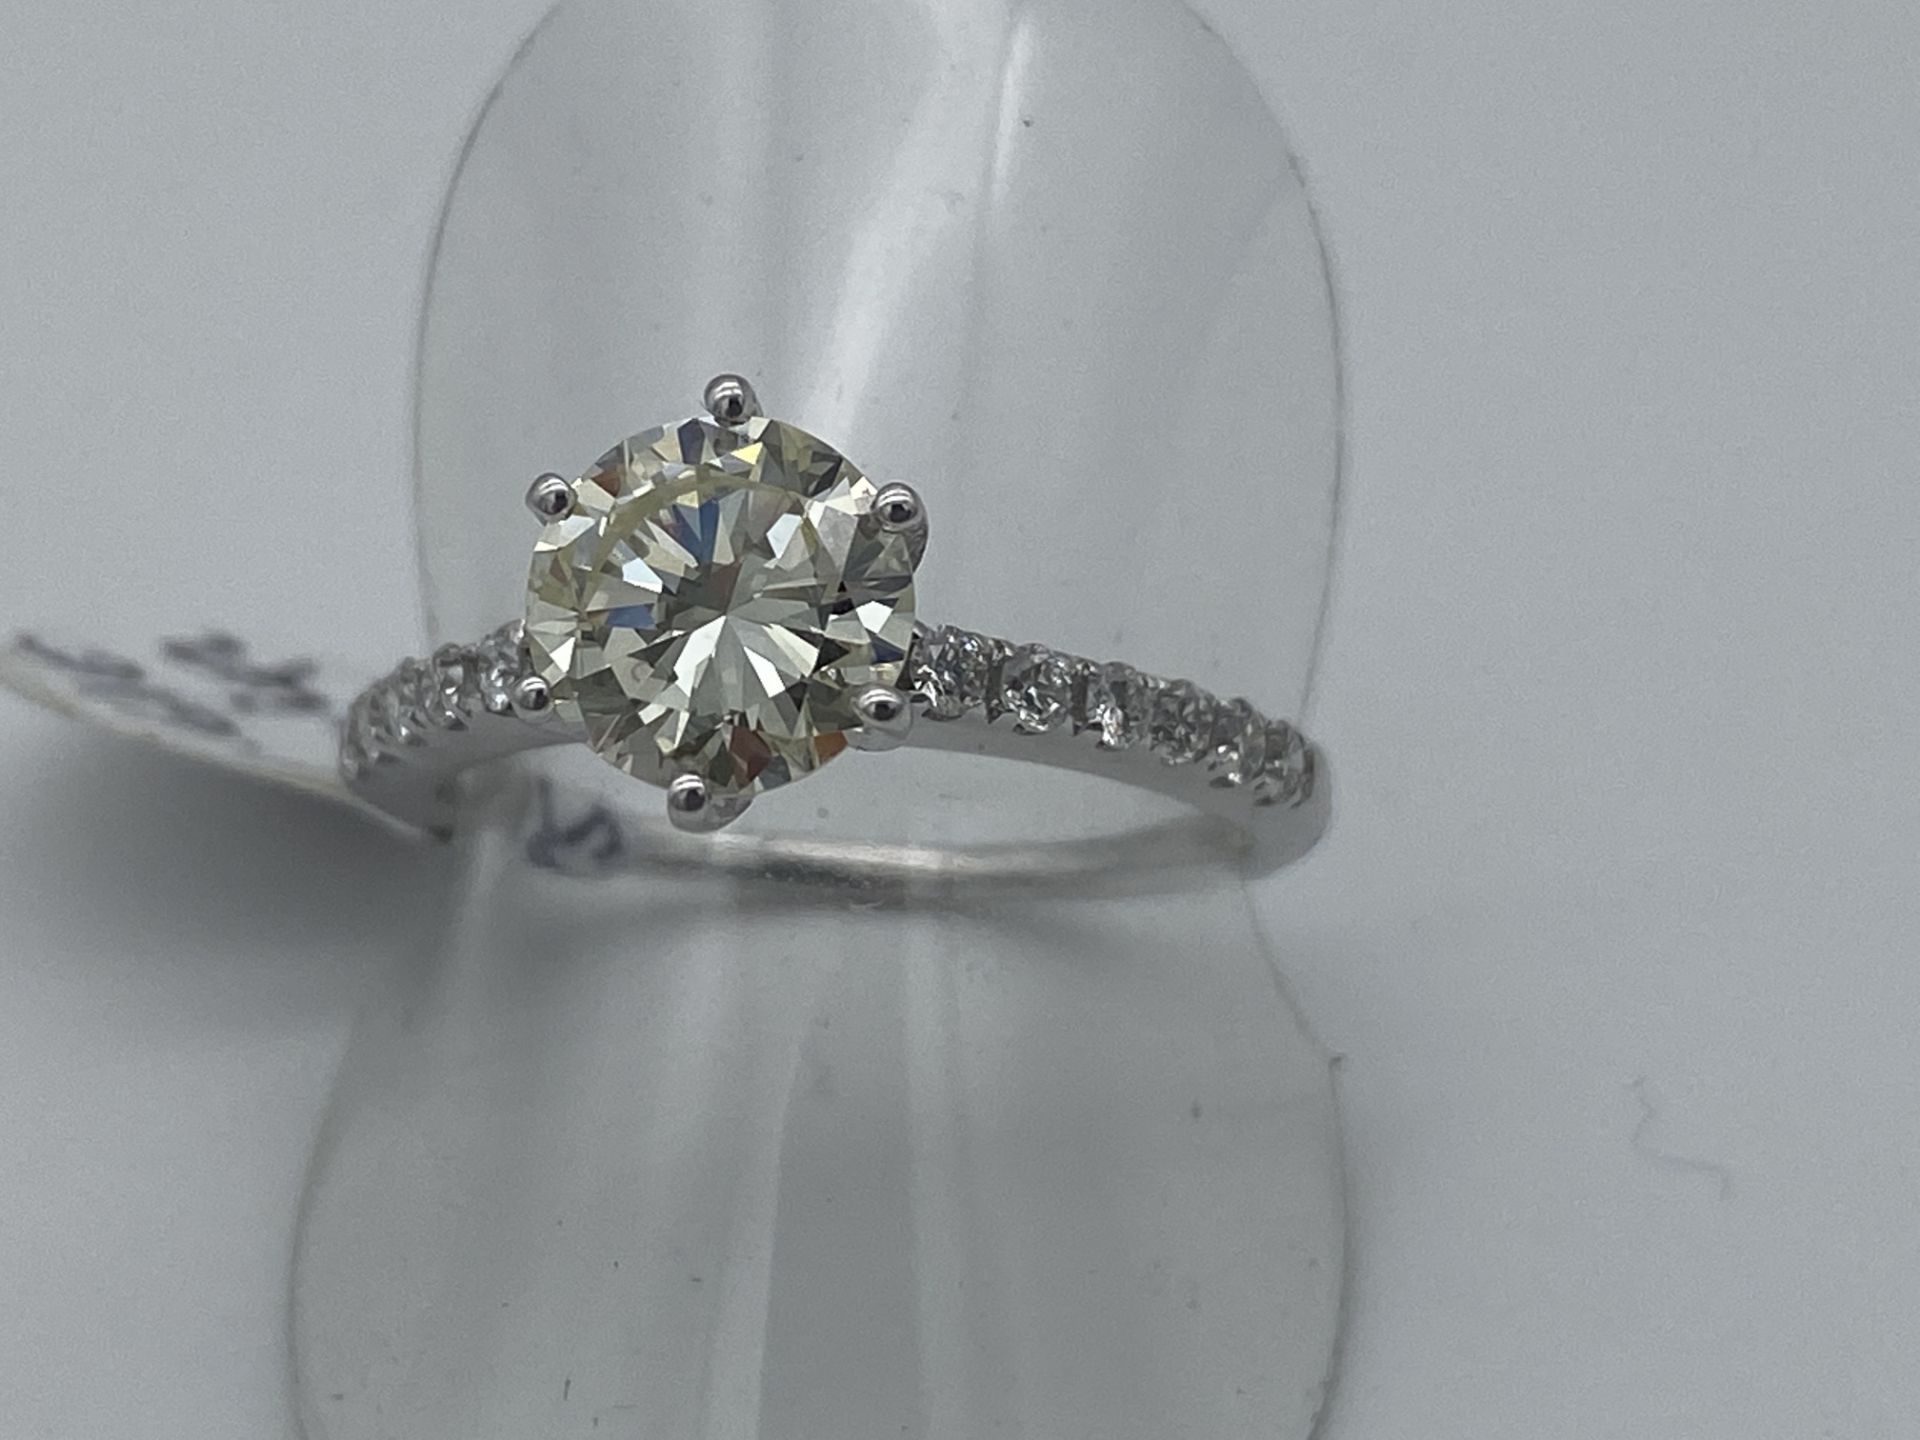 18ct GOLD 2.03ct TDW DIAMOND SOLITAIRE RING VVS2 - Image 4 of 5